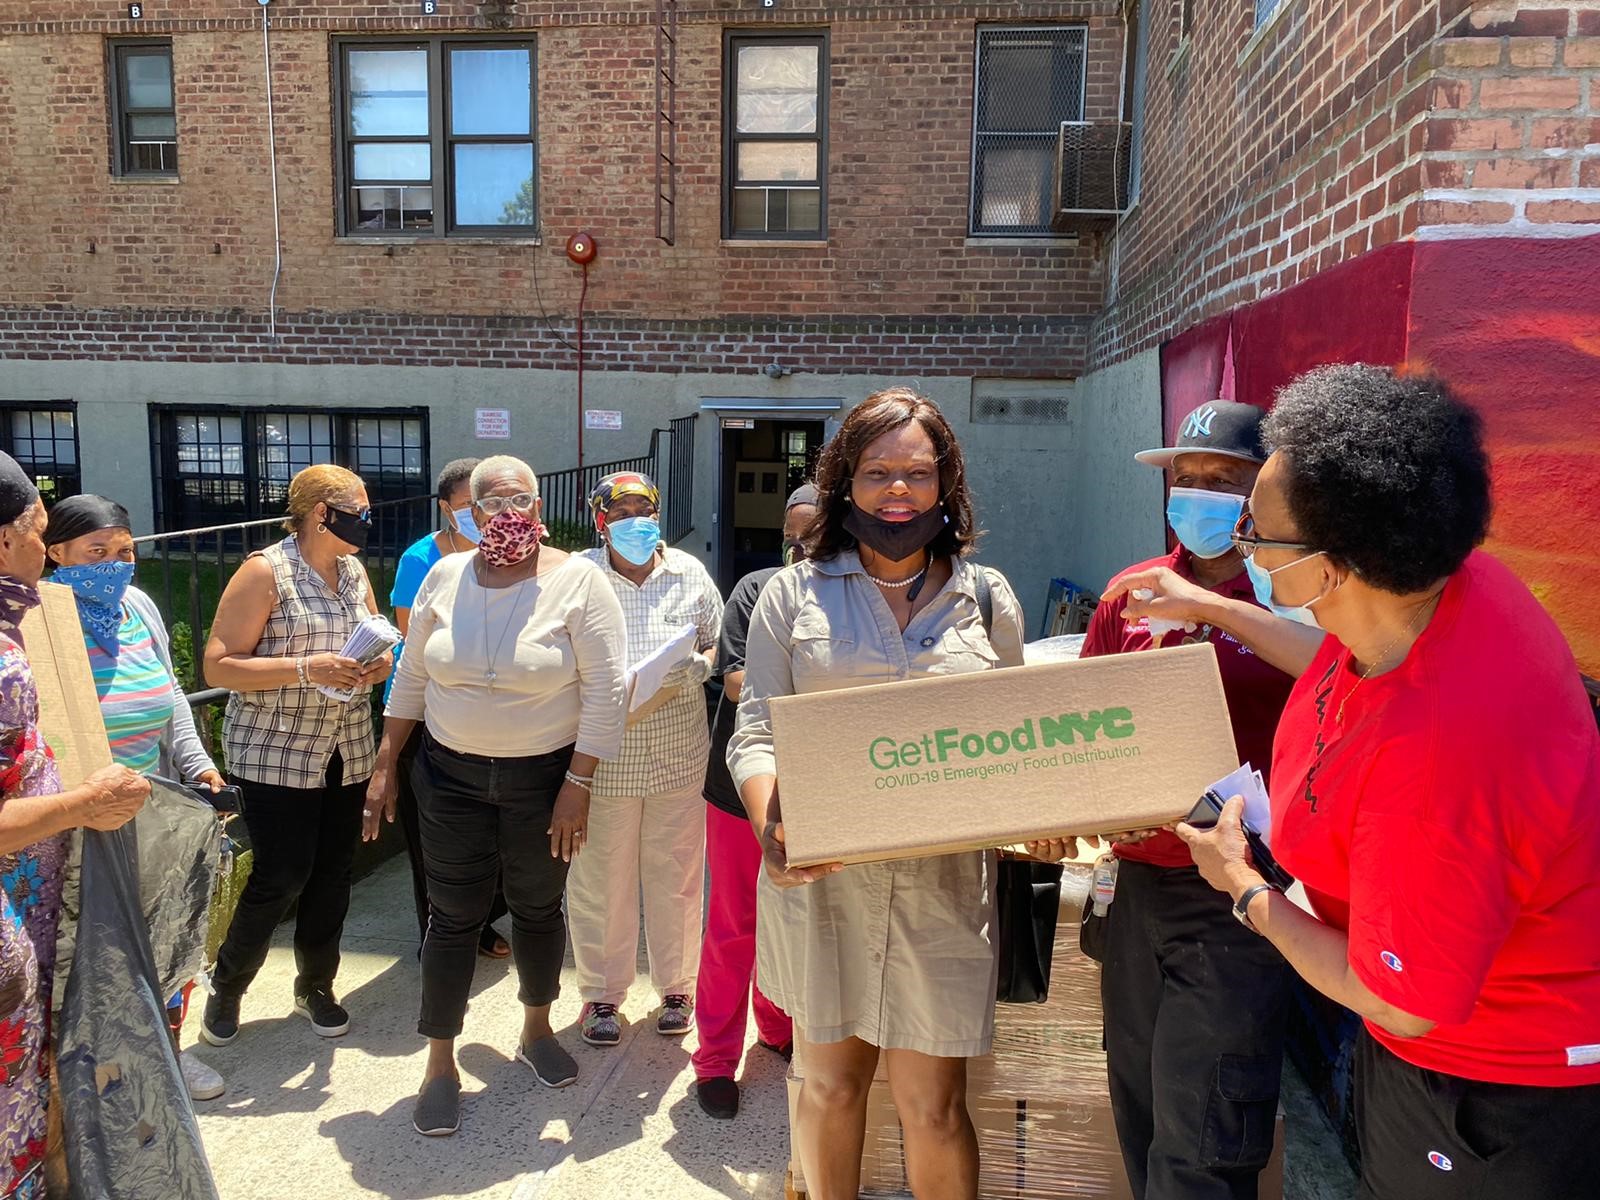 Assemblymember Rodneyse Bichotte and other community members gather together for a food distribution at the Flatbush Garden Community Center on June 12, 2020.